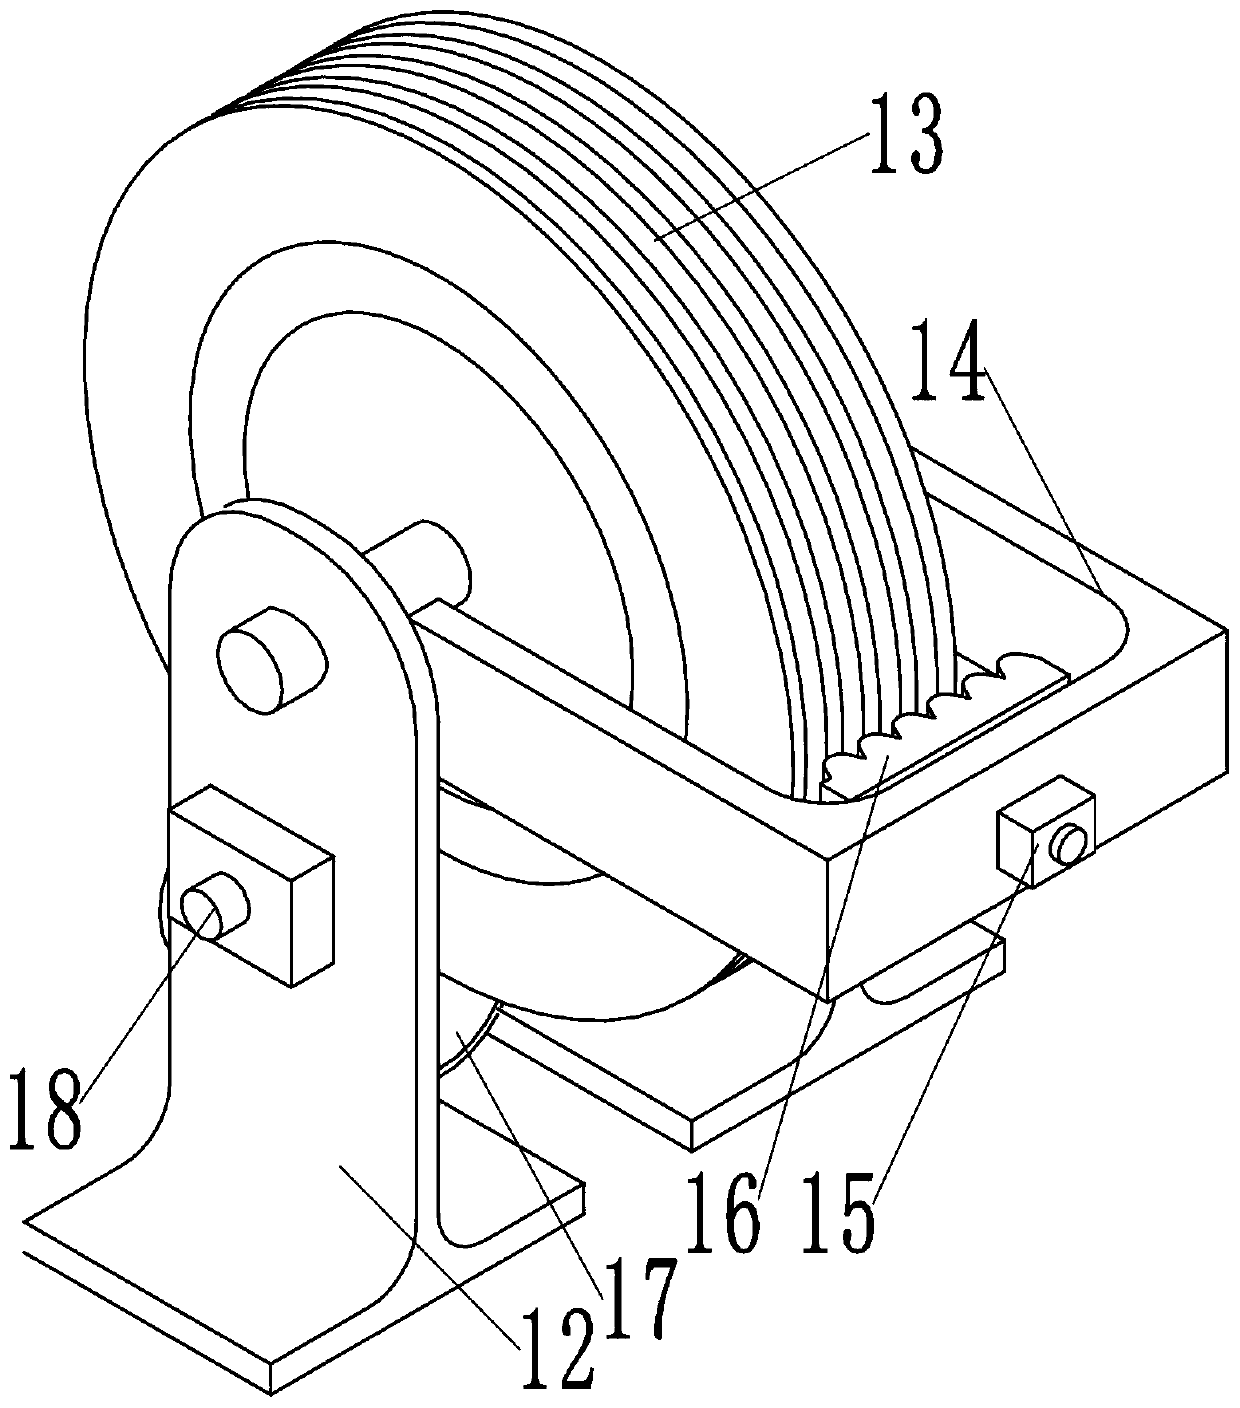 Cable insulation layer sample cutting device and method